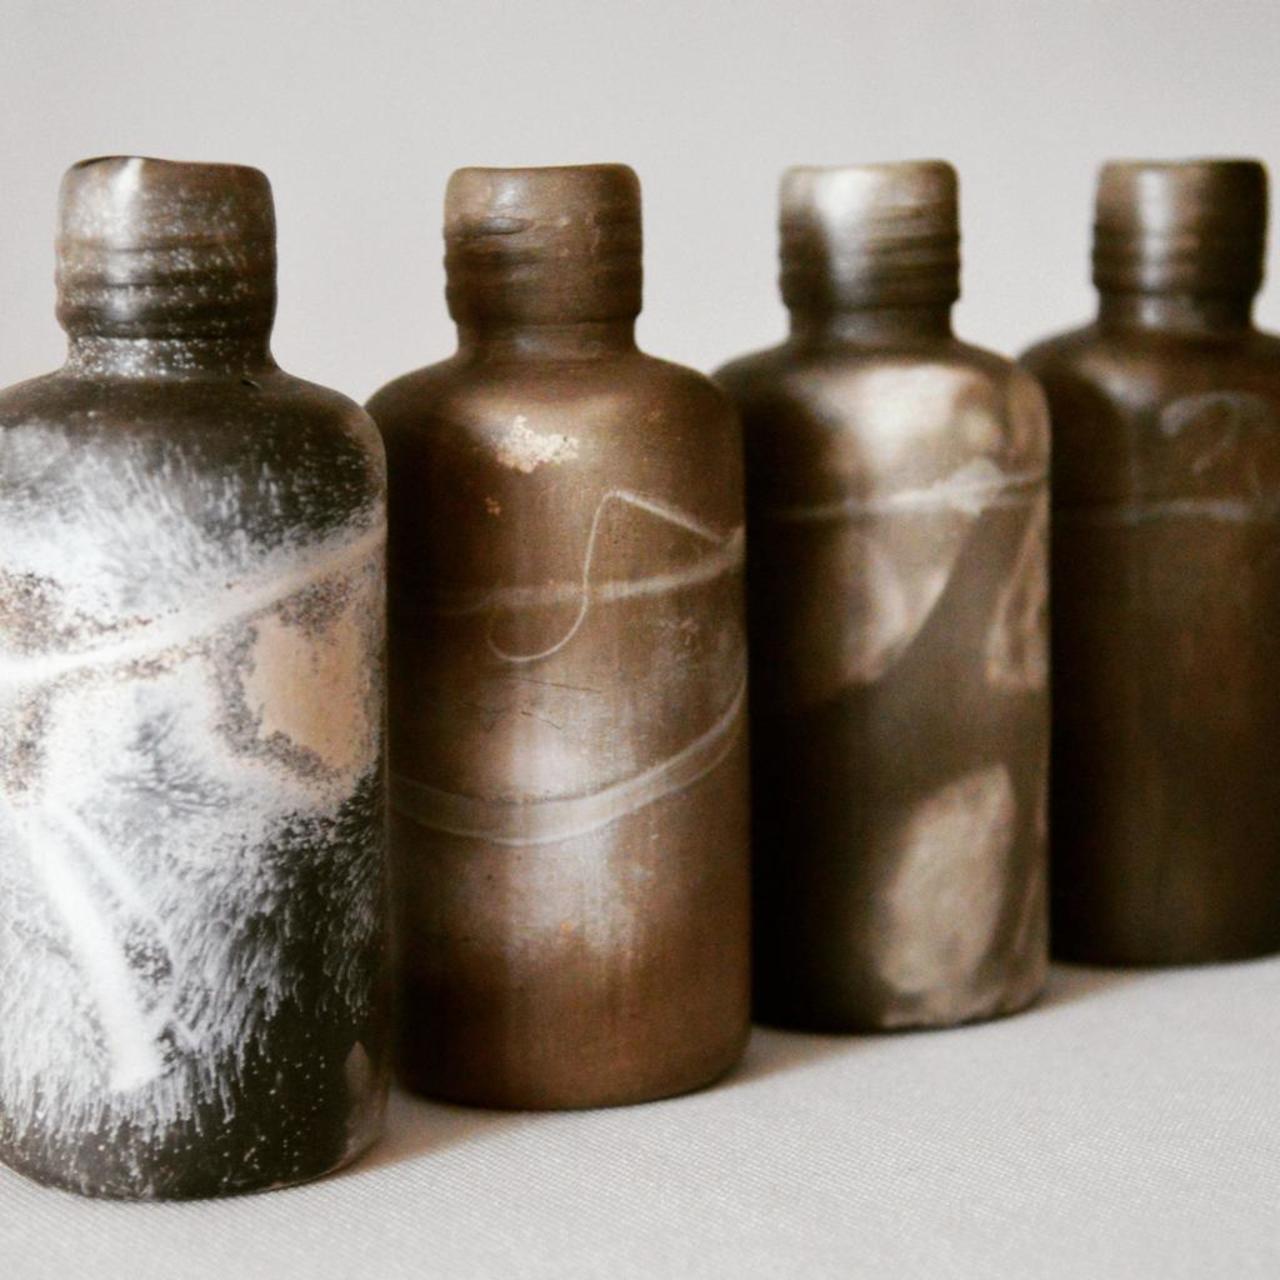 Limited edition smoke fired bottles. #ceramics #porcelain #smokefire #display http://t.co/8yRv9kNj93